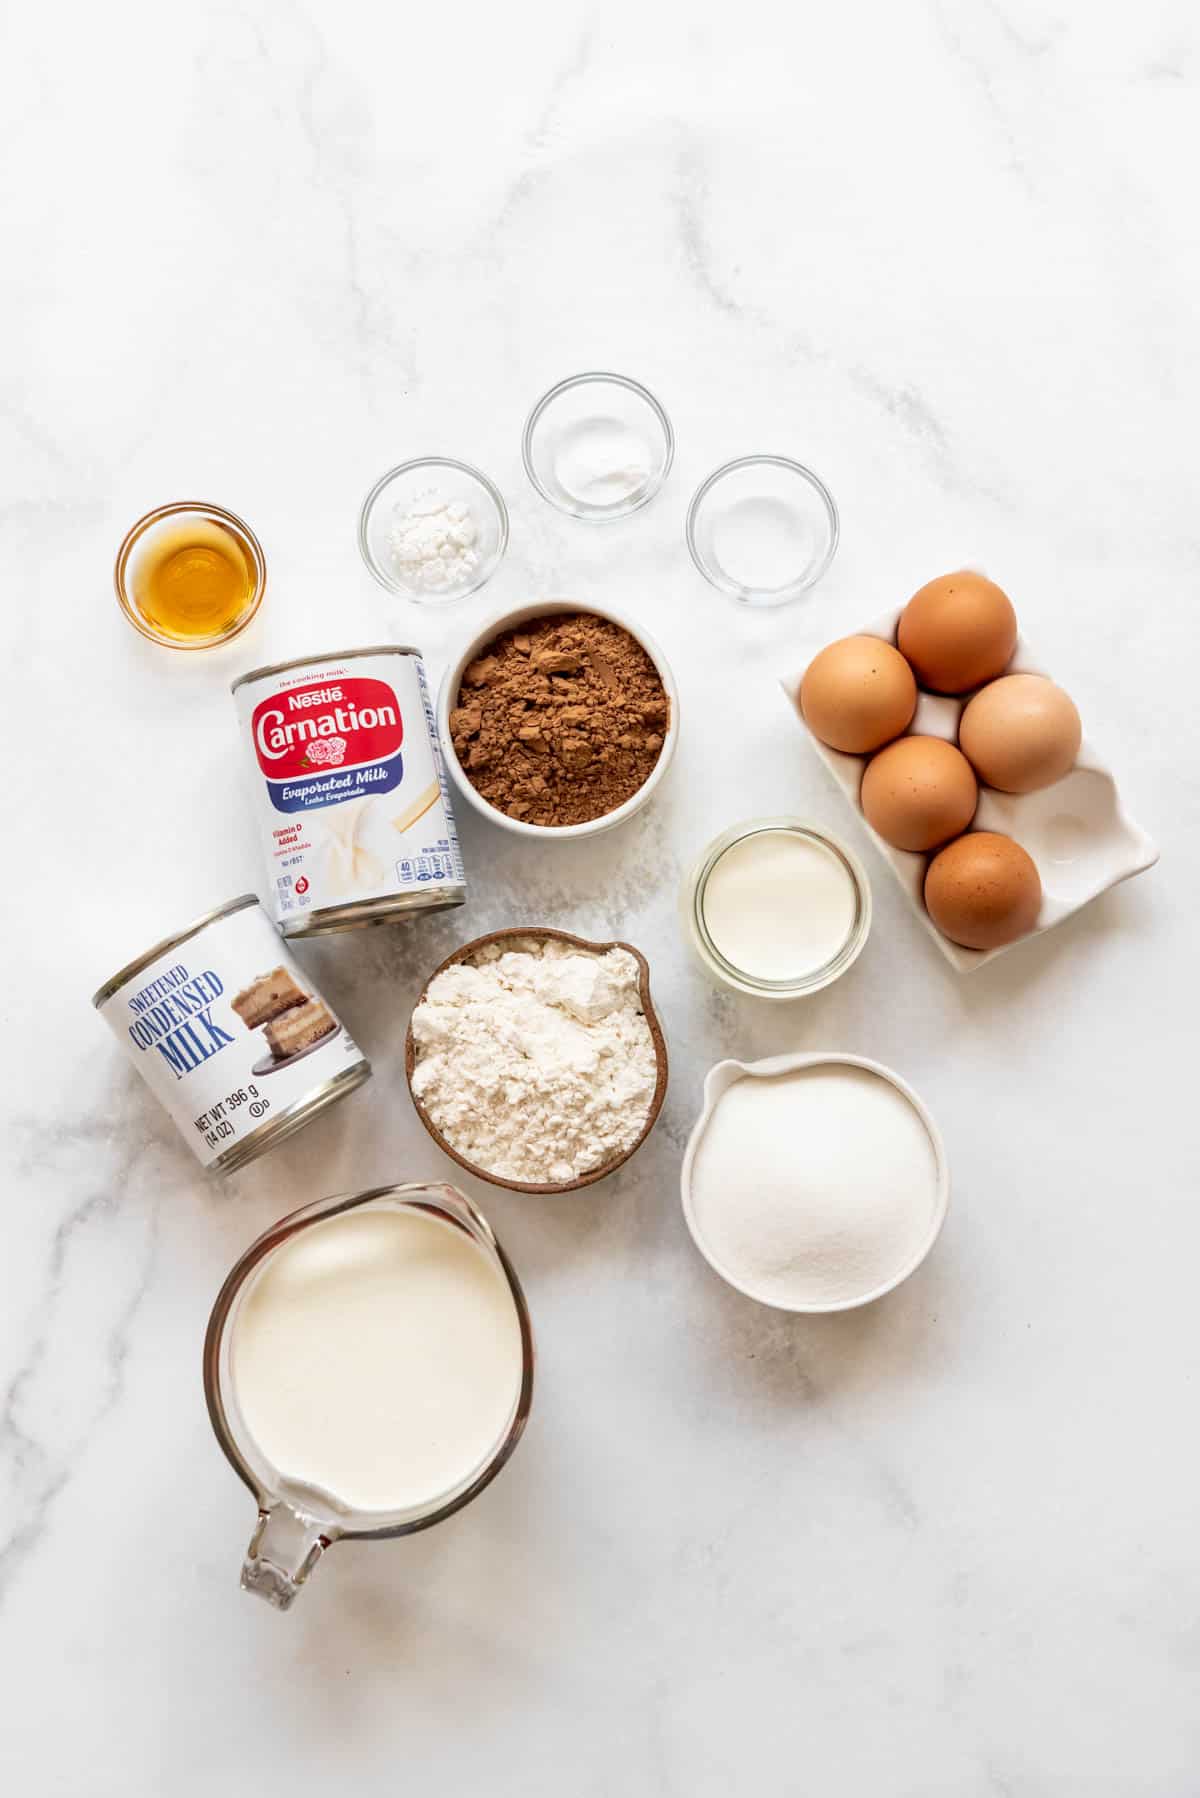 Ingredients for chocolate tres leches cake.